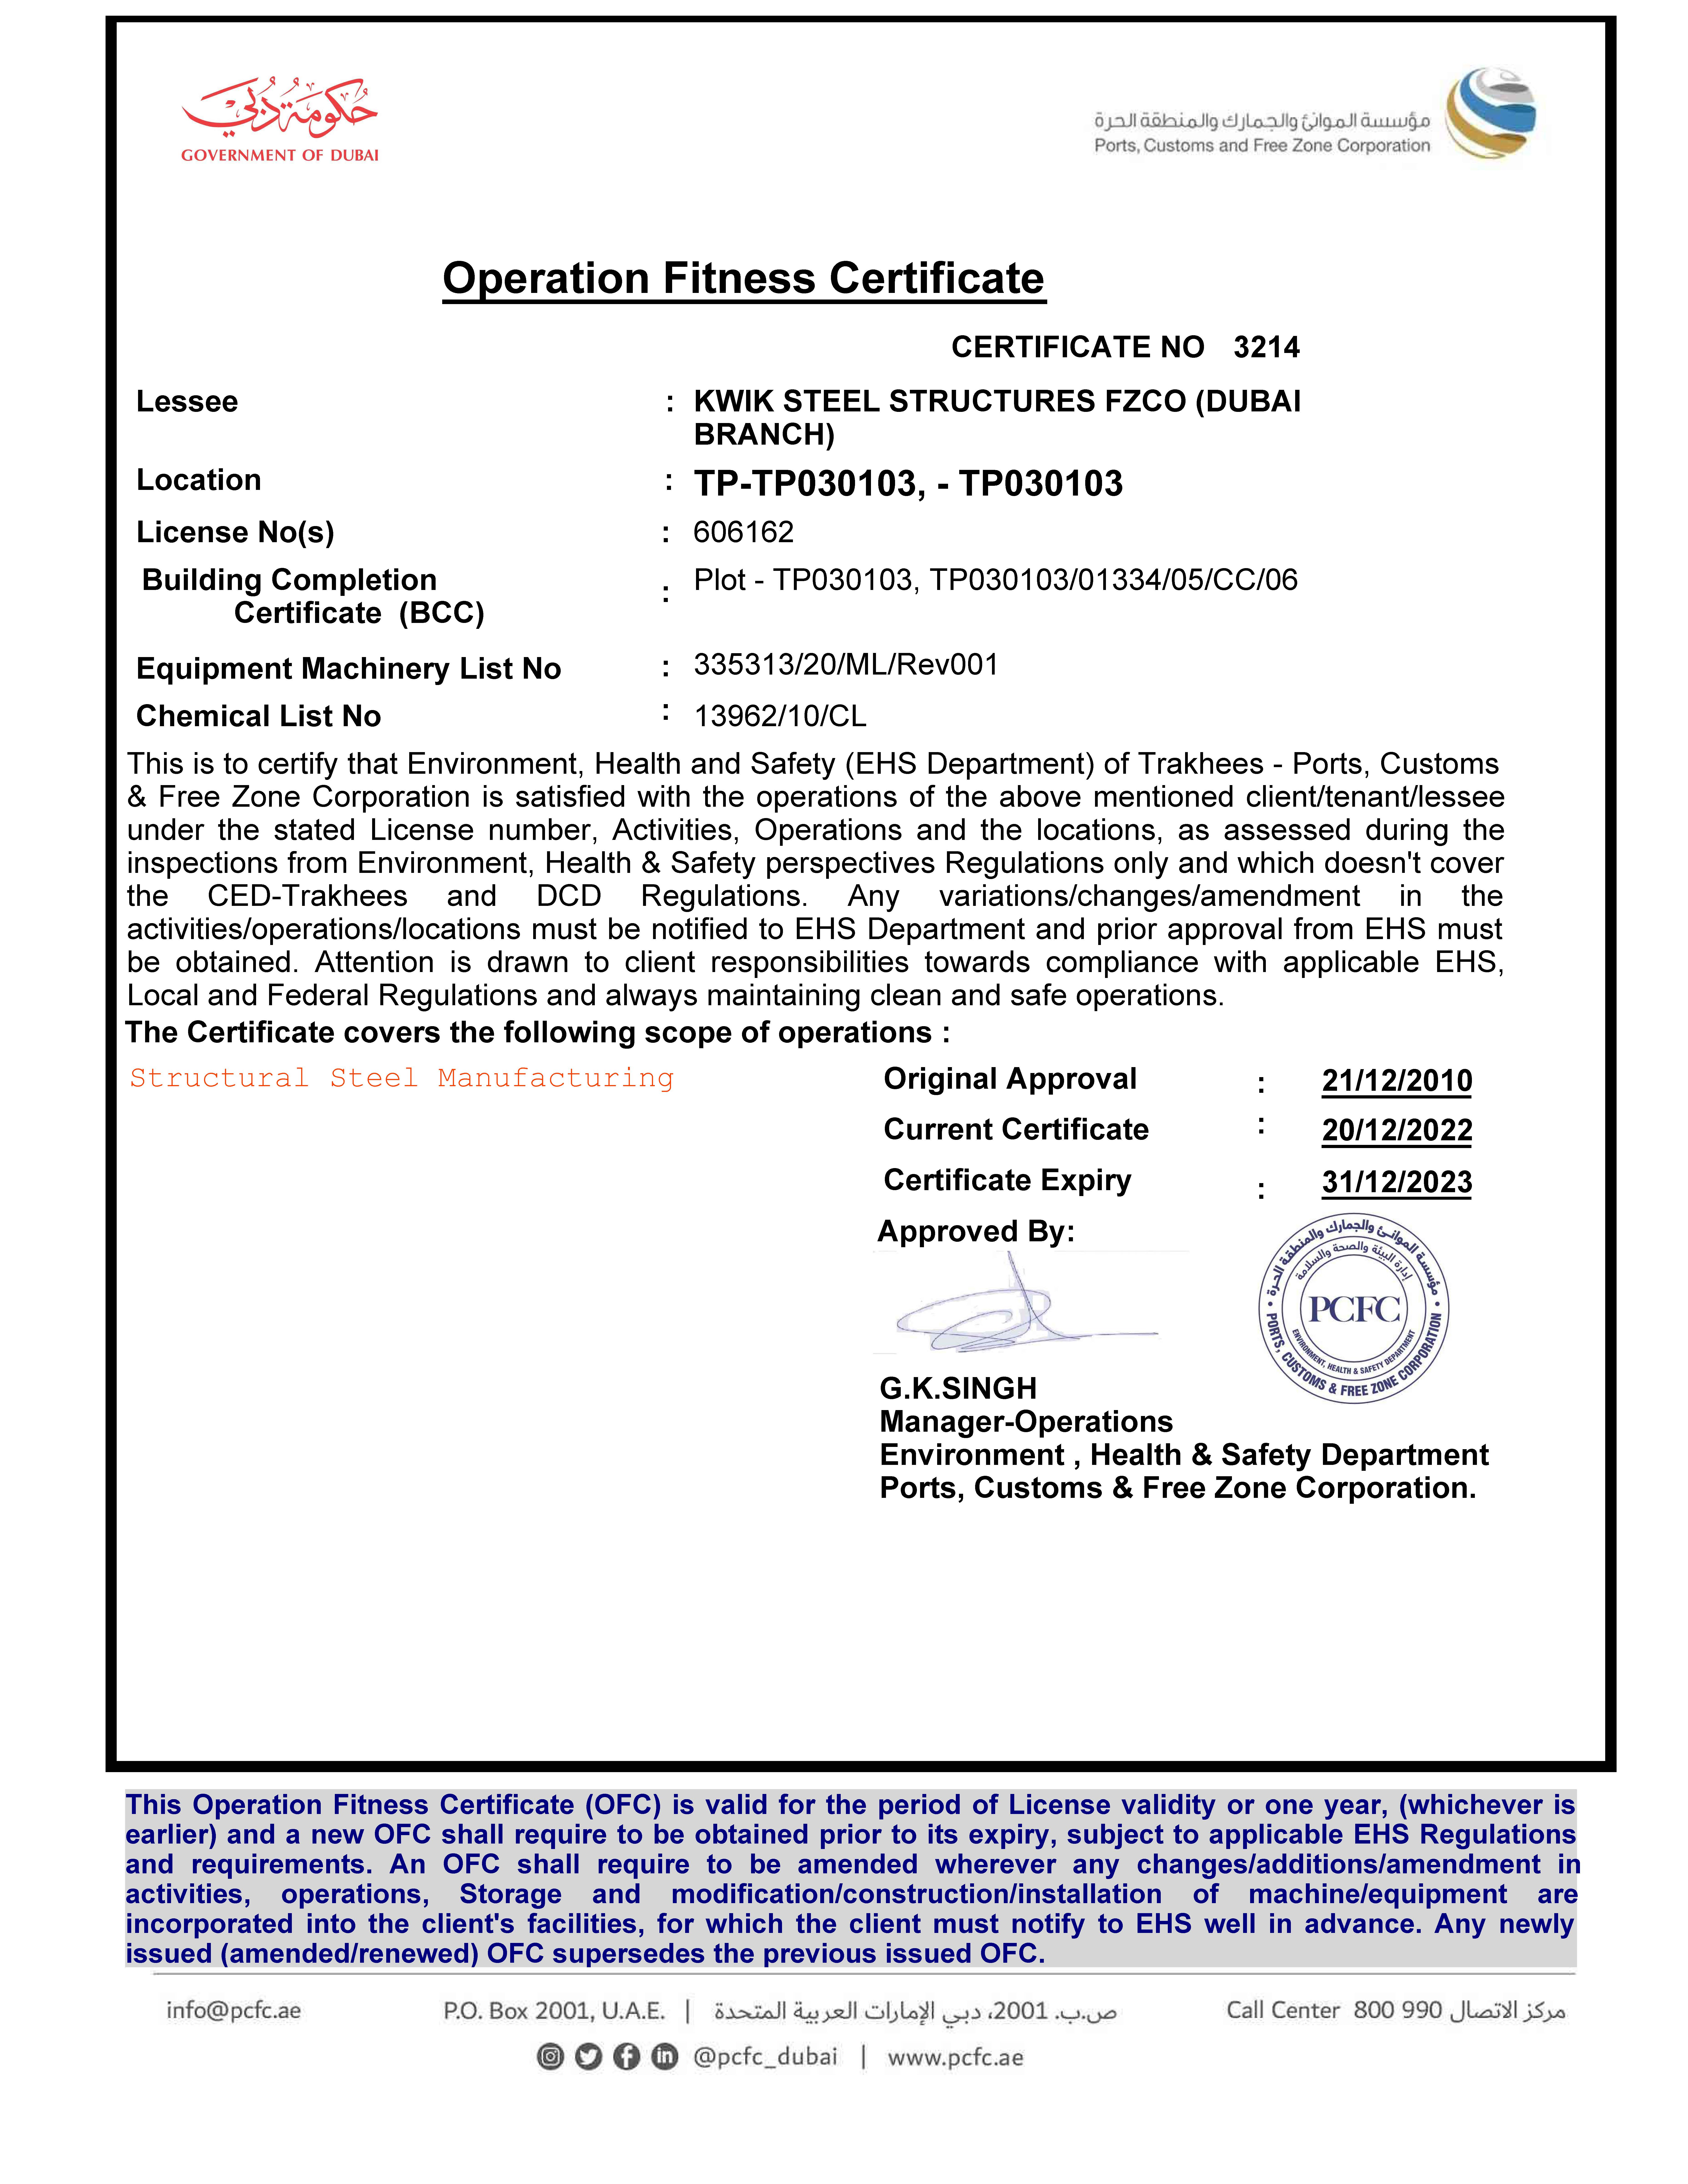 Operation Fitness Certificate issued by Trakhees - Ports, Customs & Free Zone Corporation